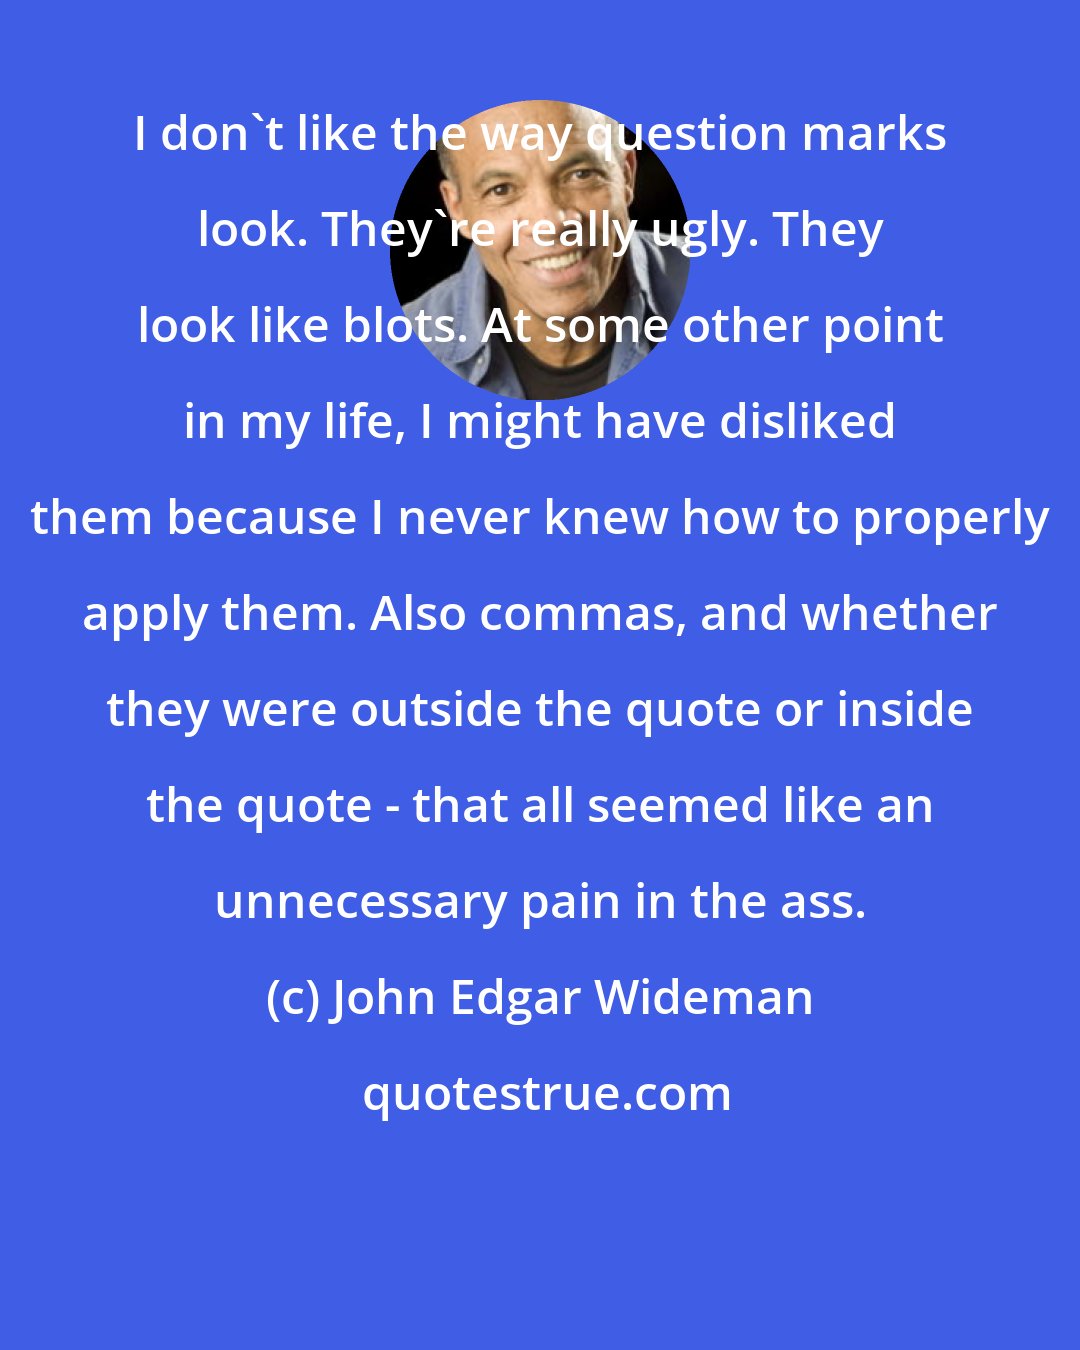 John Edgar Wideman: I don't like the way question marks look. They're really ugly. They look like blots. At some other point in my life, I might have disliked them because I never knew how to properly apply them. Also commas, and whether they were outside the quote or inside the quote - that all seemed like an unnecessary pain in the ass.